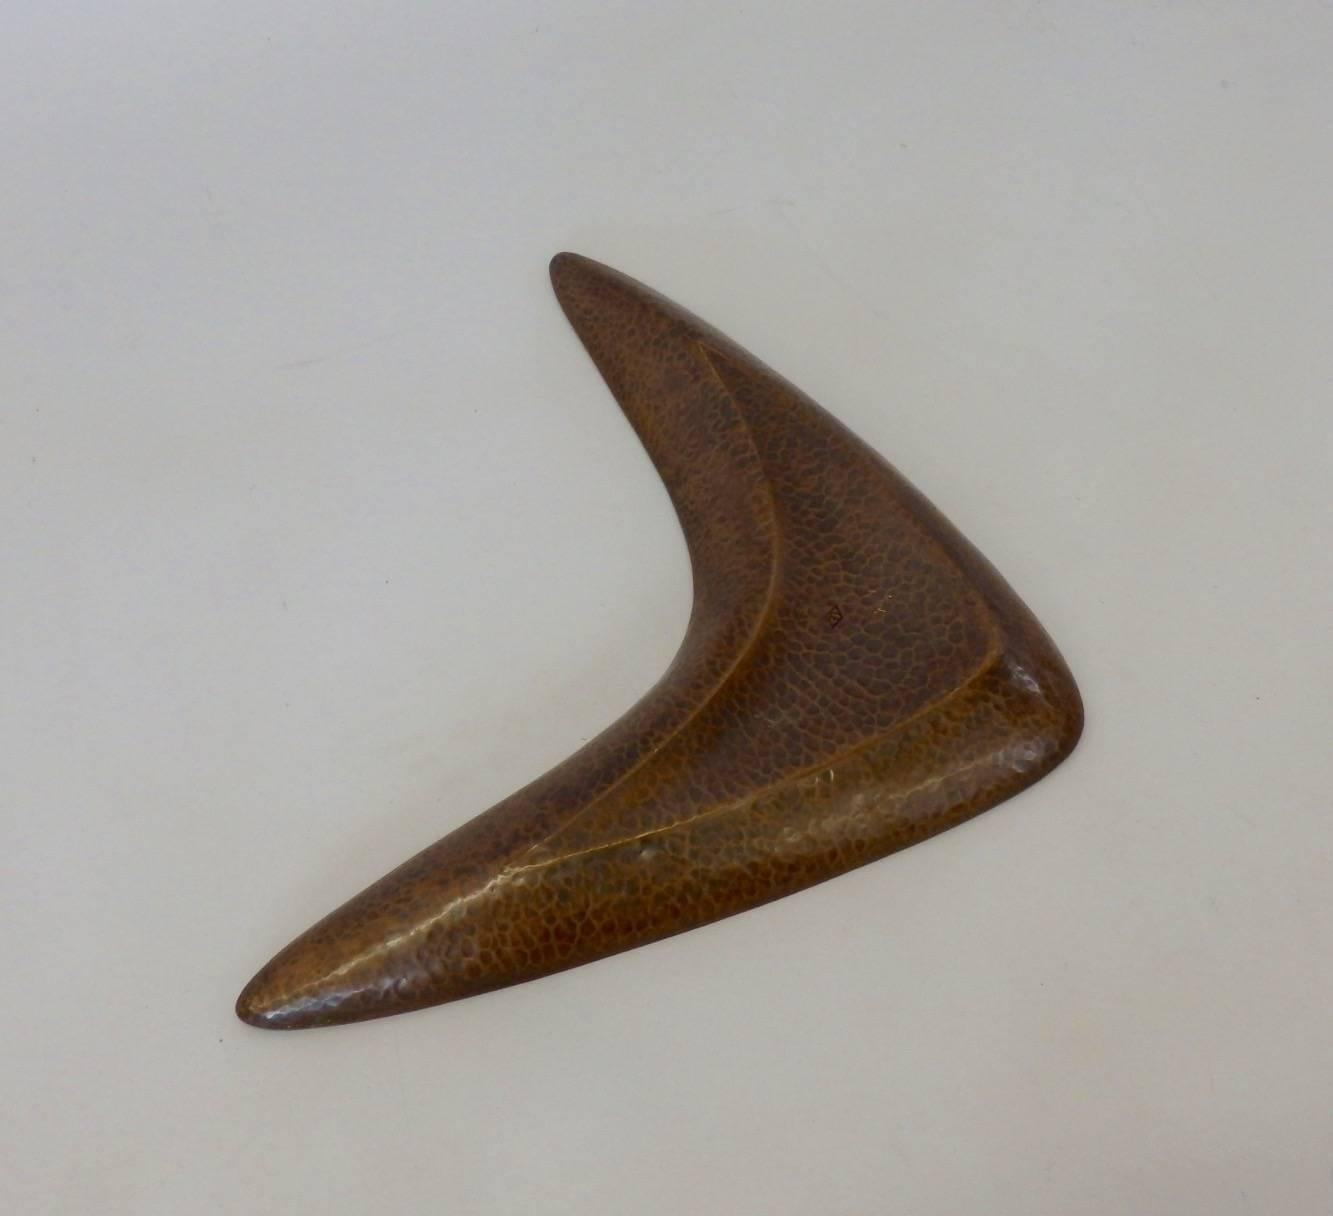 Very nicely made and crafted boomerang or flying V-form hammered copper bowl.